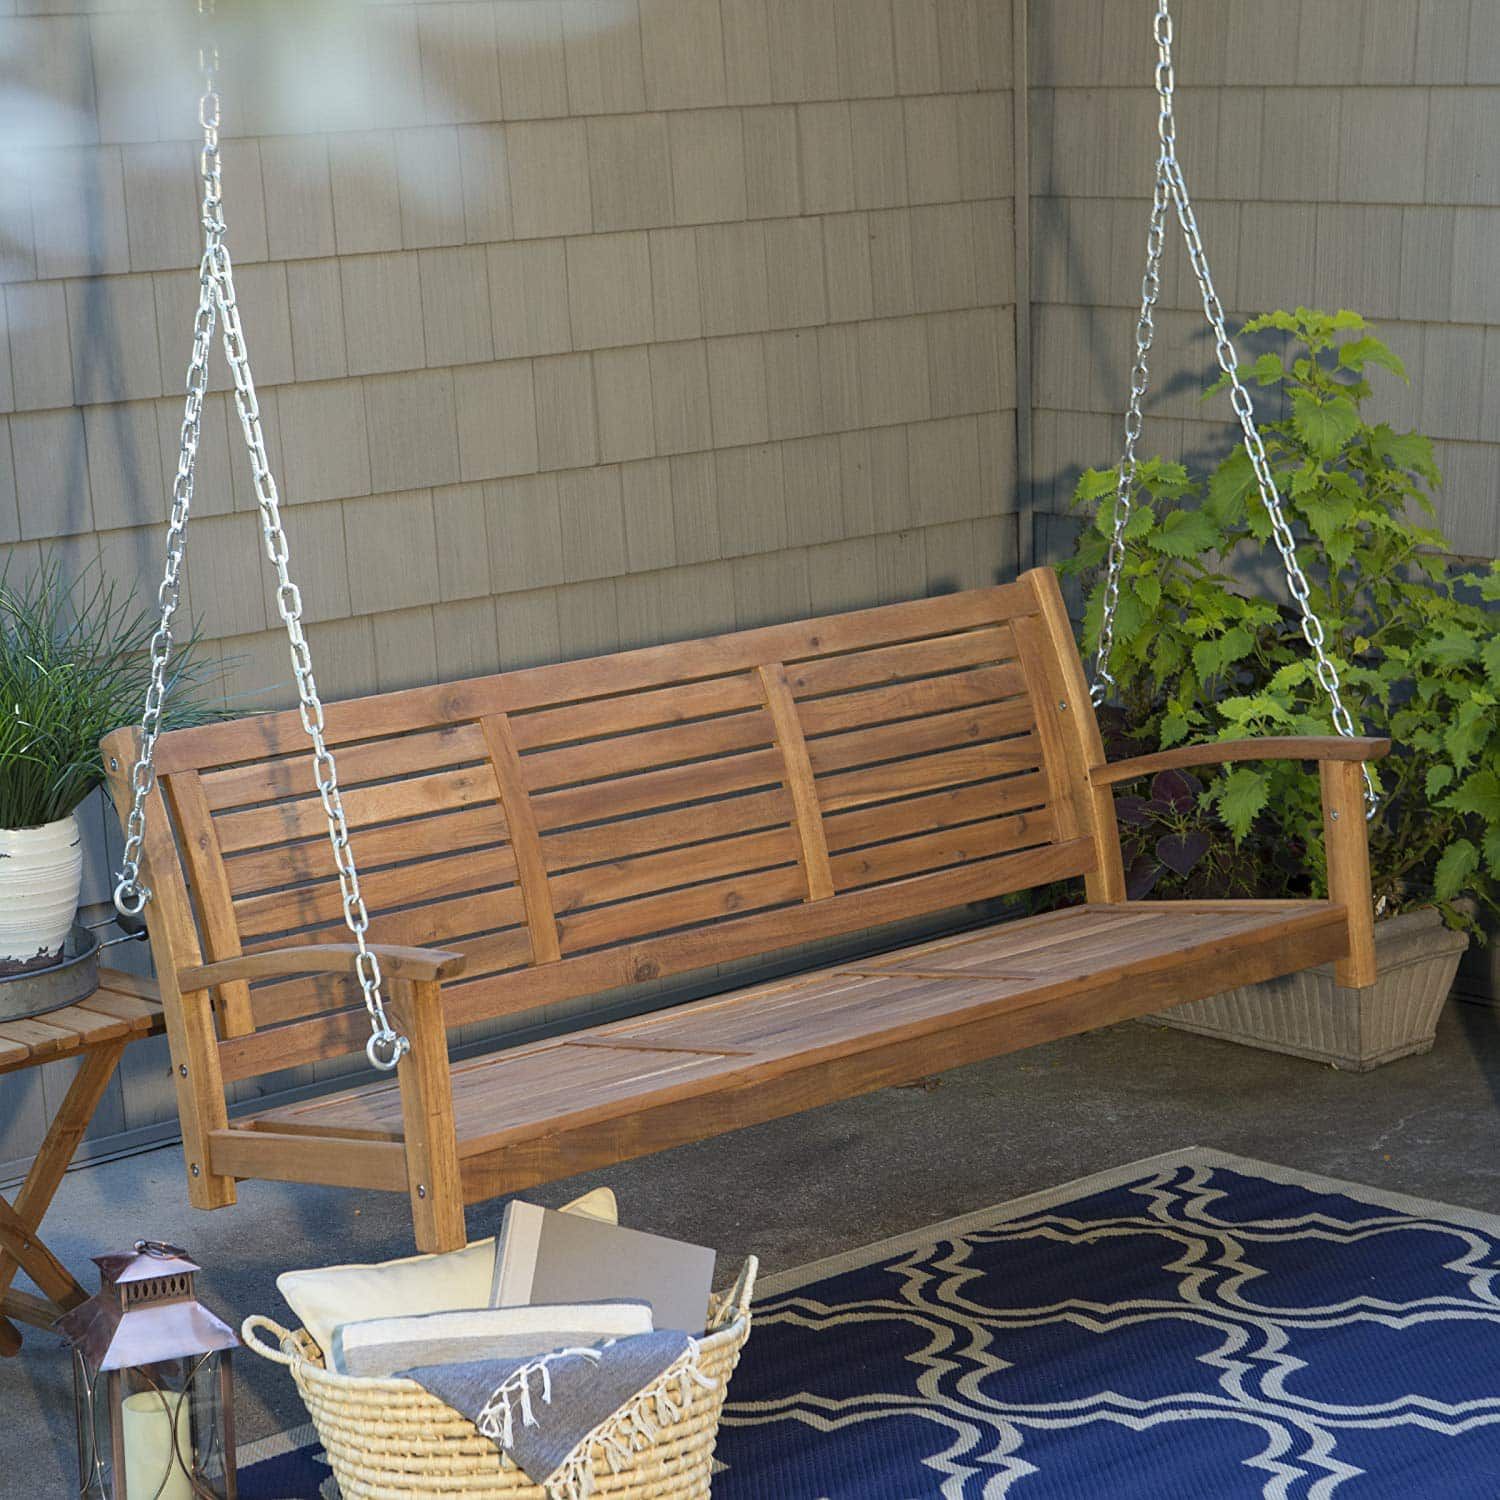 Top 10 Best Porch Swings In 2020 Reviews | Buyer's Guide Within Canopy Patio Porch Swings With Pillows And Cup Holders (View 14 of 25)